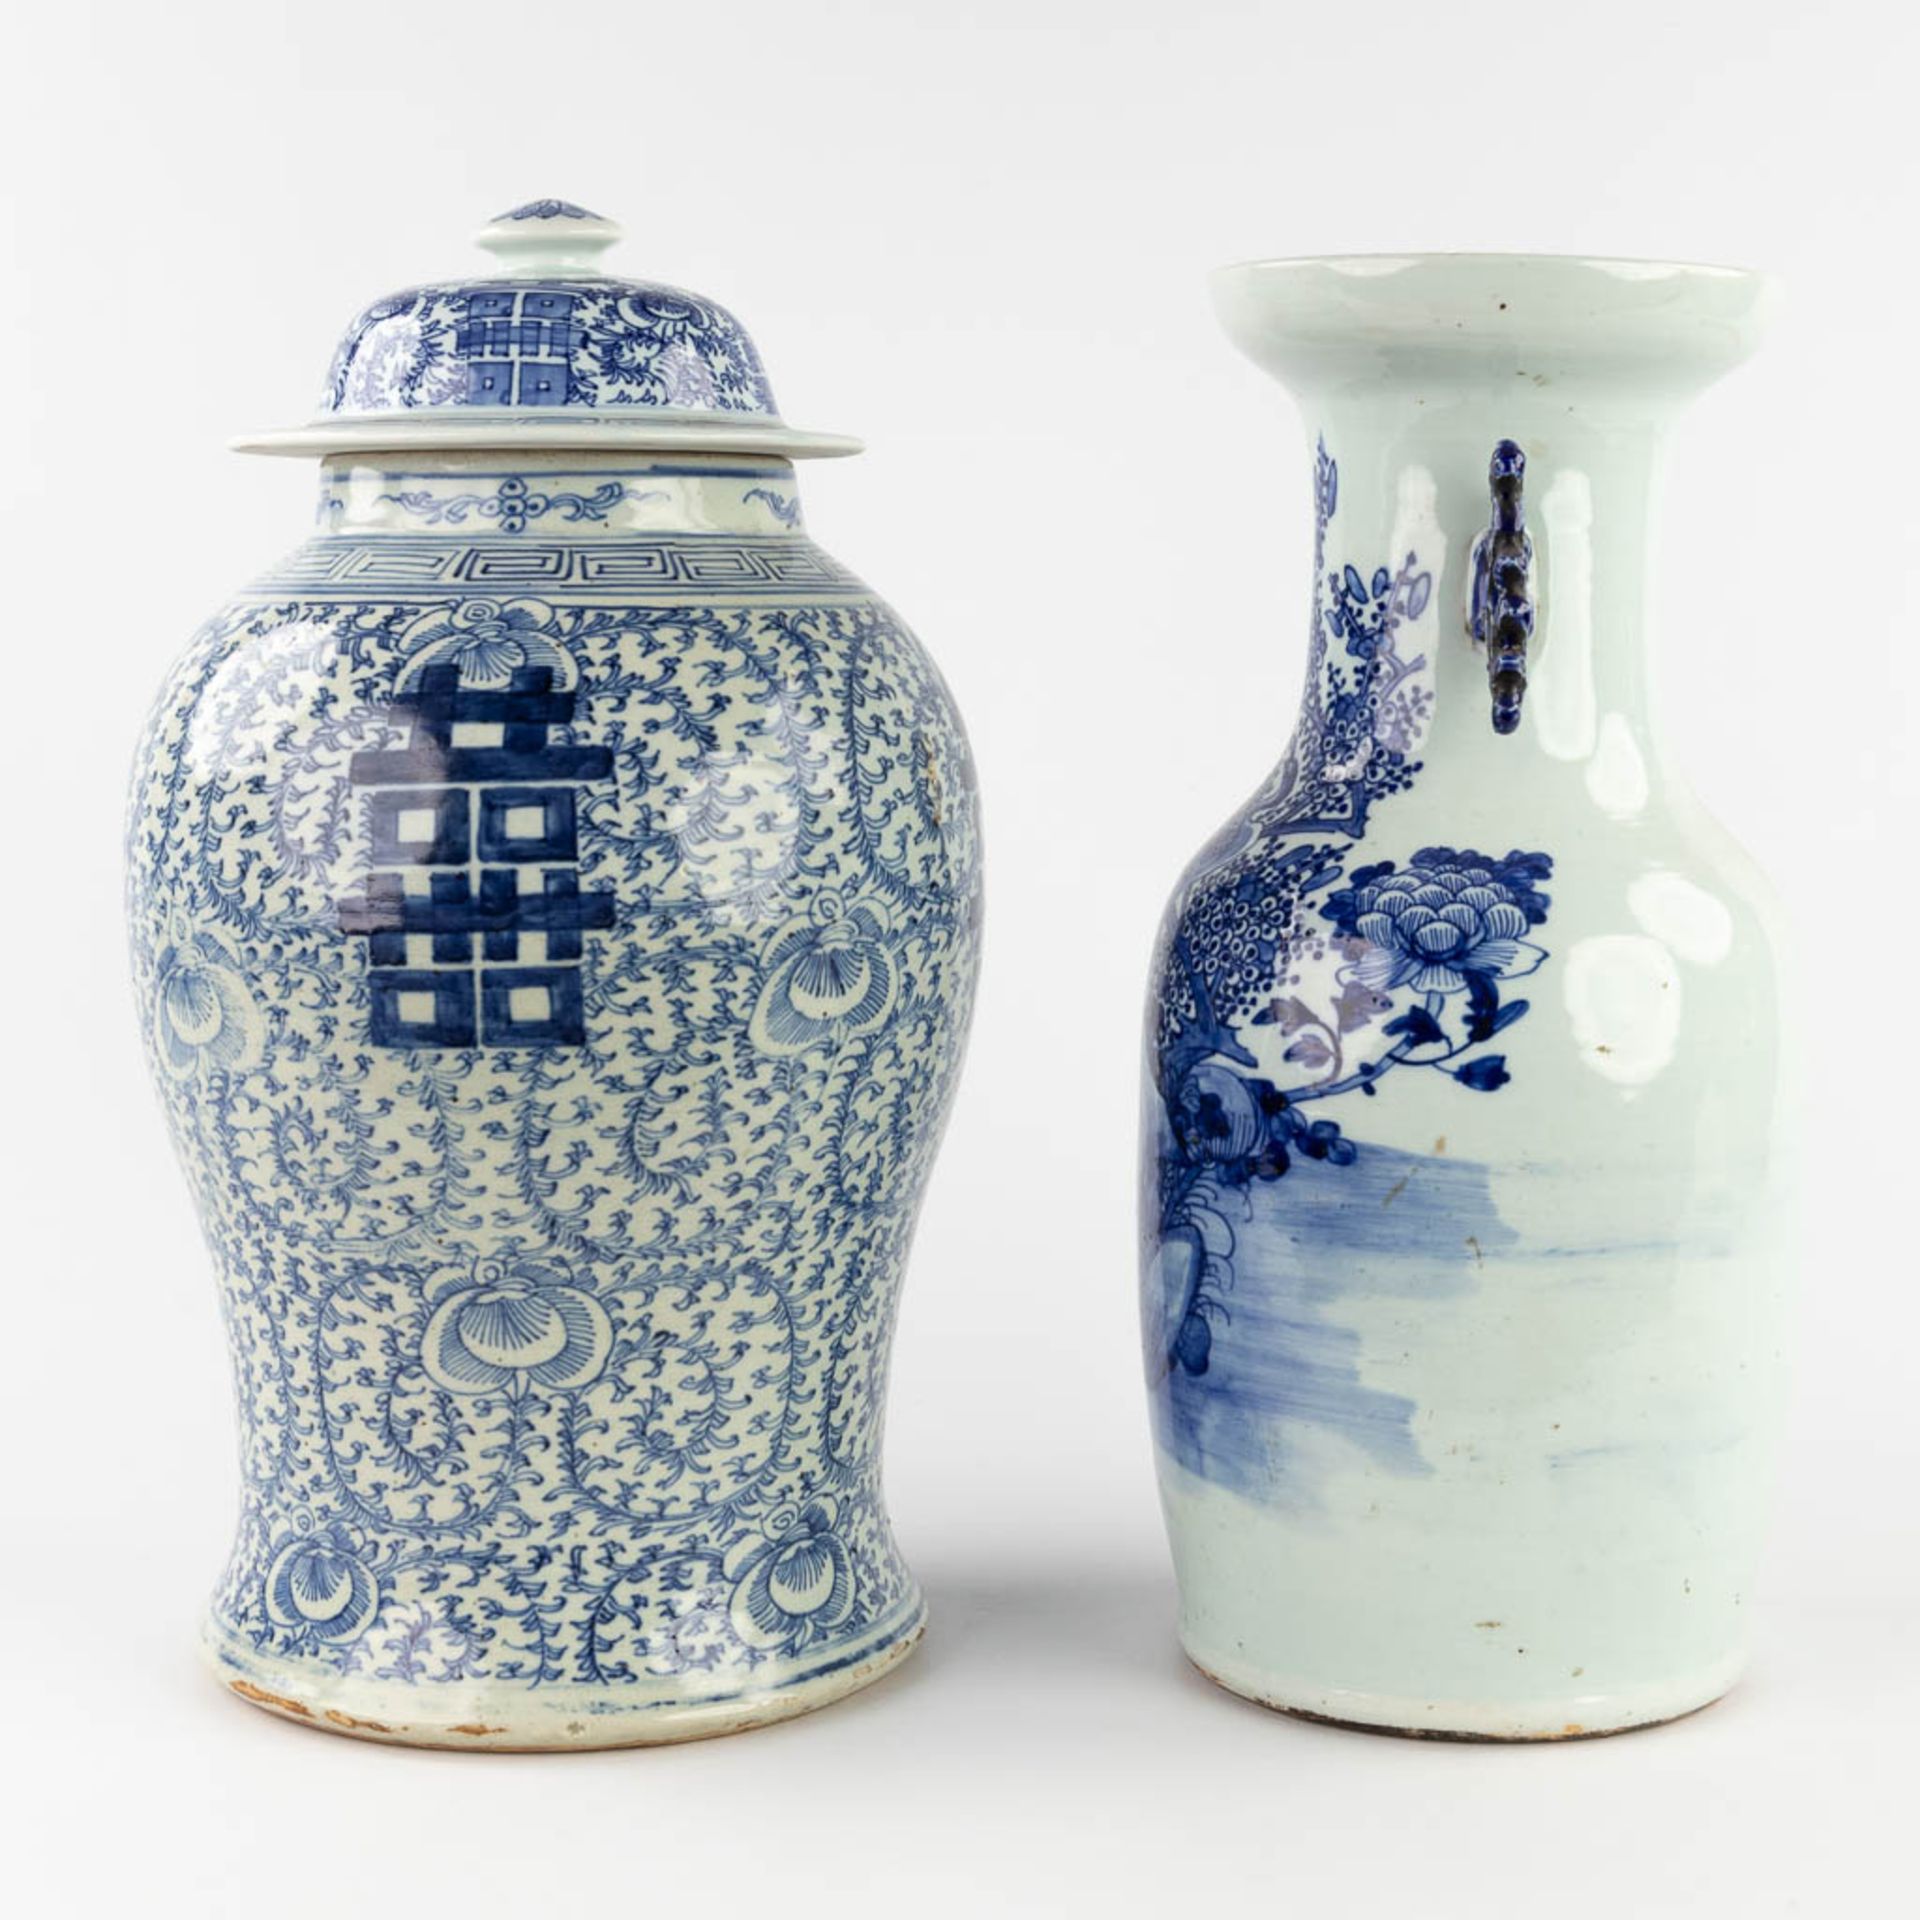 Two Chinese vases, of which one with a lid. Blue-white decor. 19th/20th C. (H:45 x D:25 cm) - Image 6 of 13